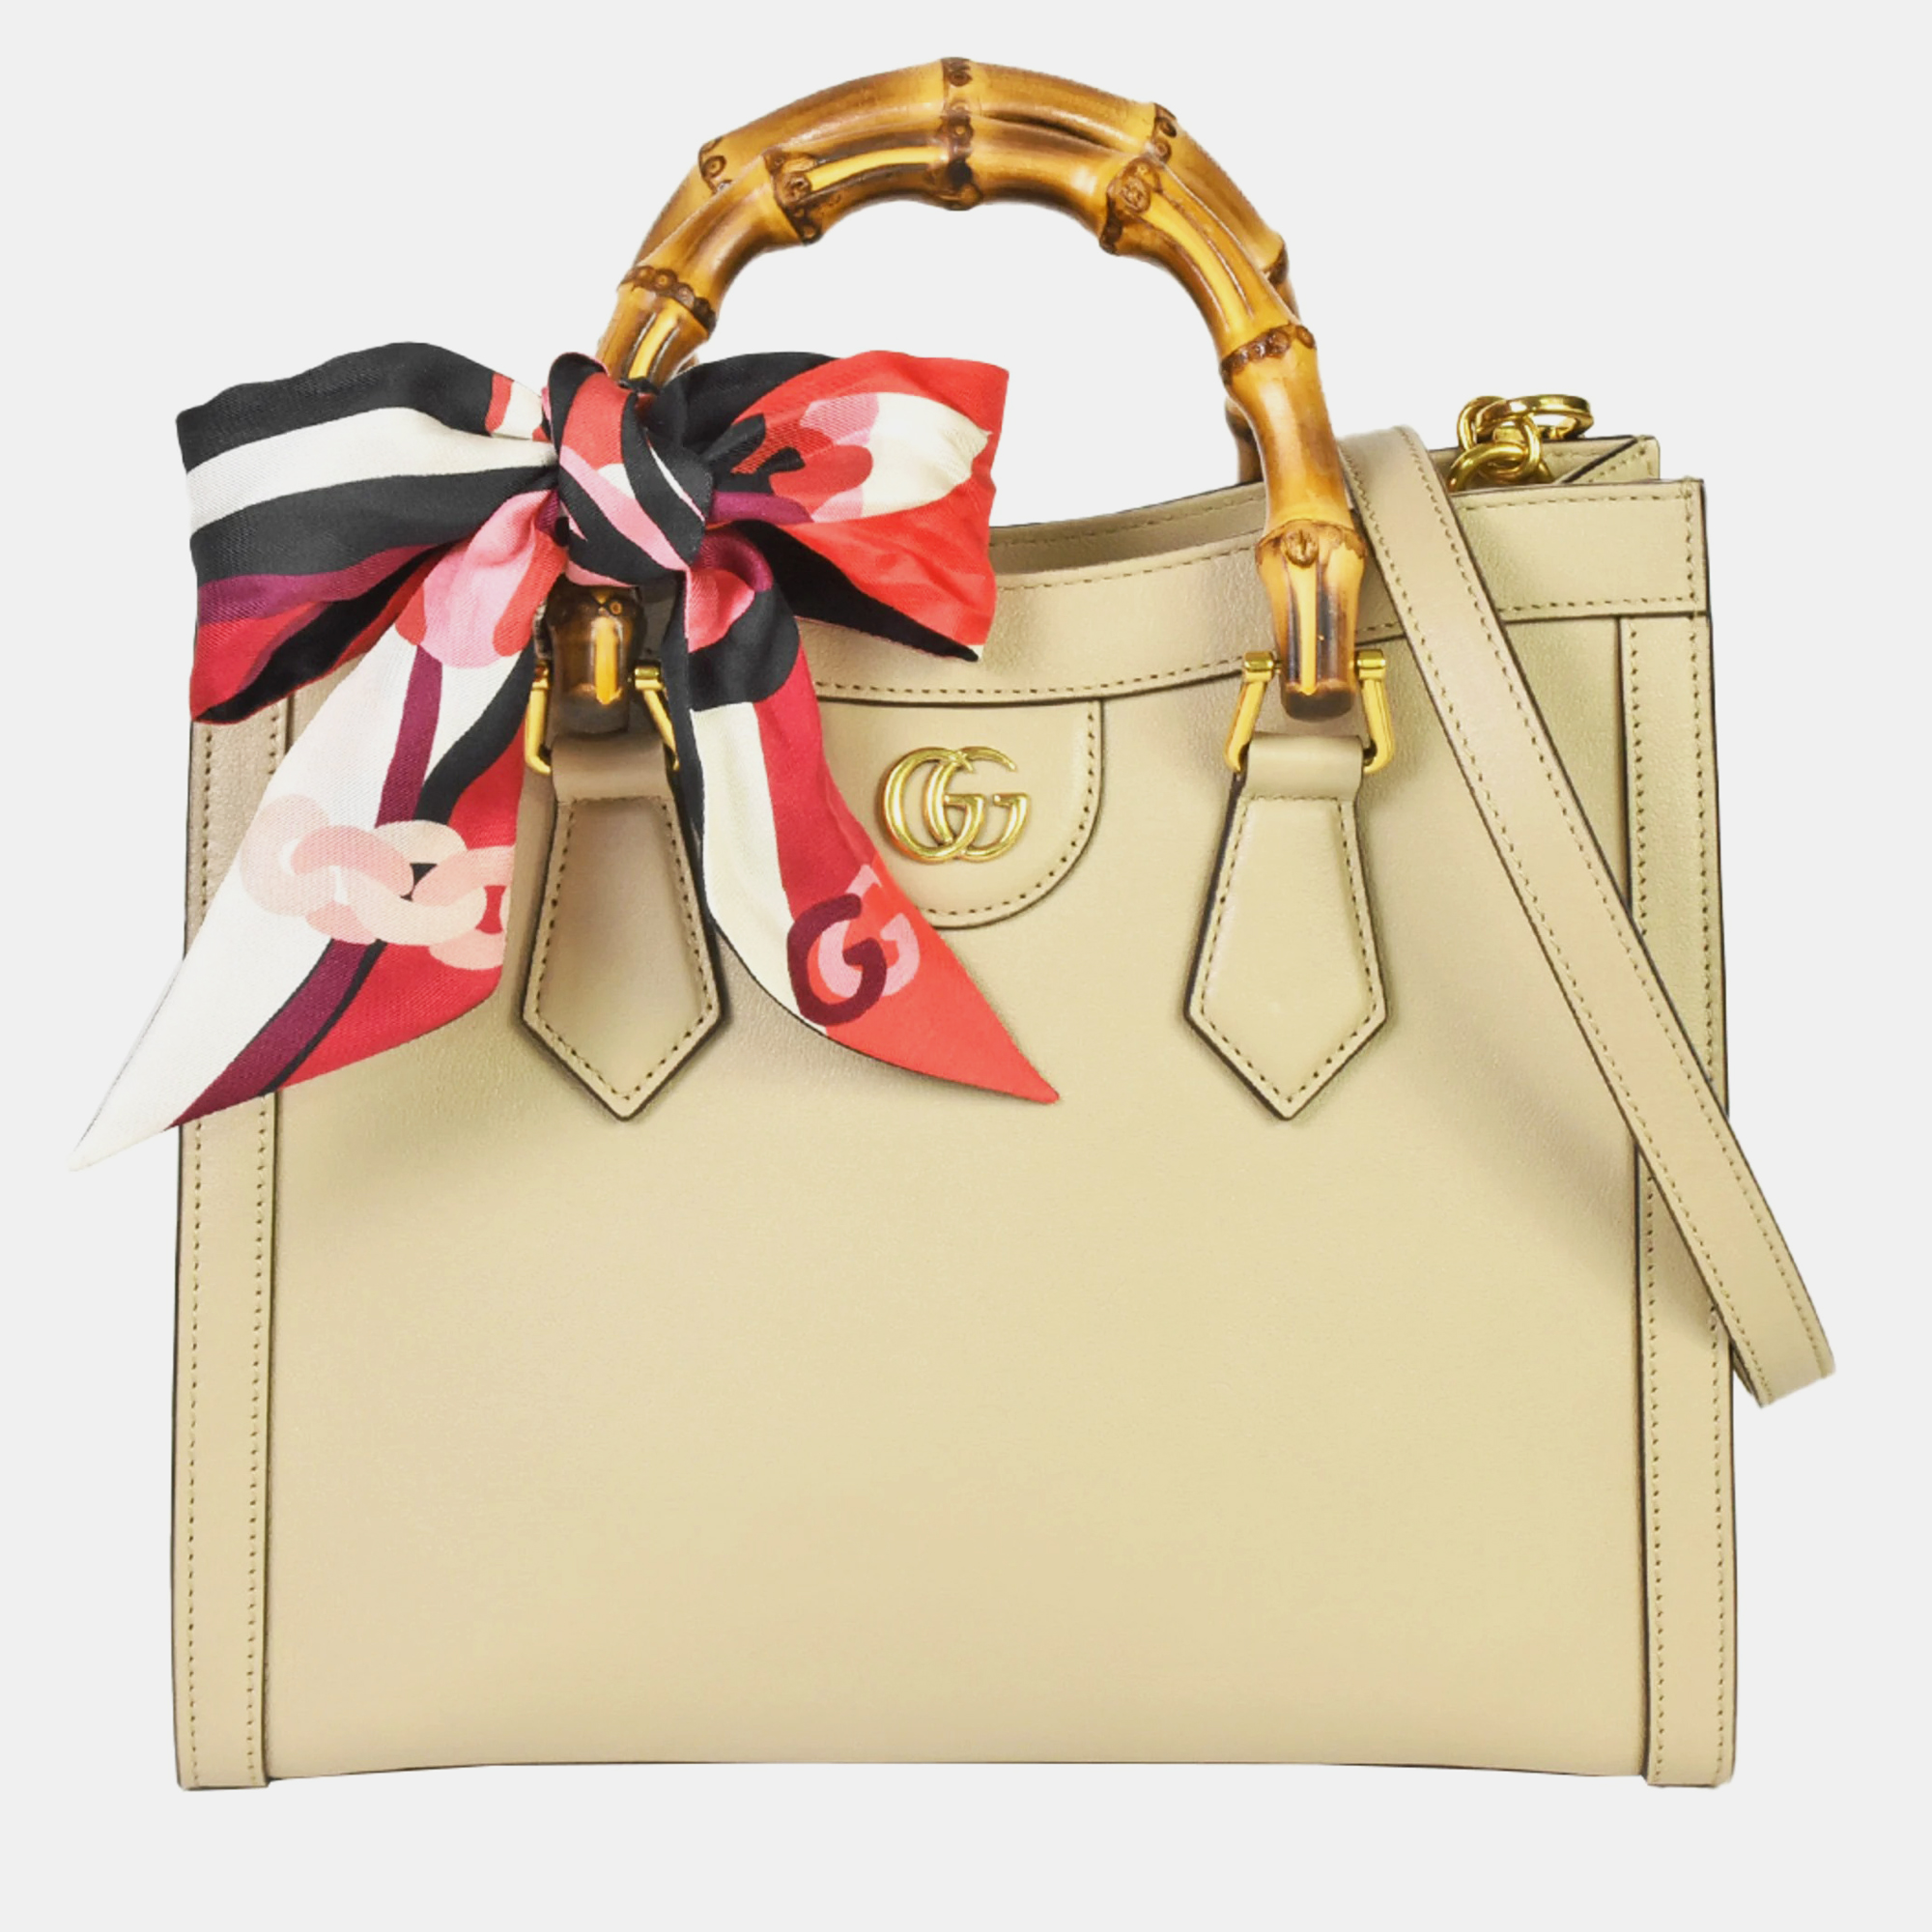 Gucci beige leather small bamboo diana tote bag with shoulder strap